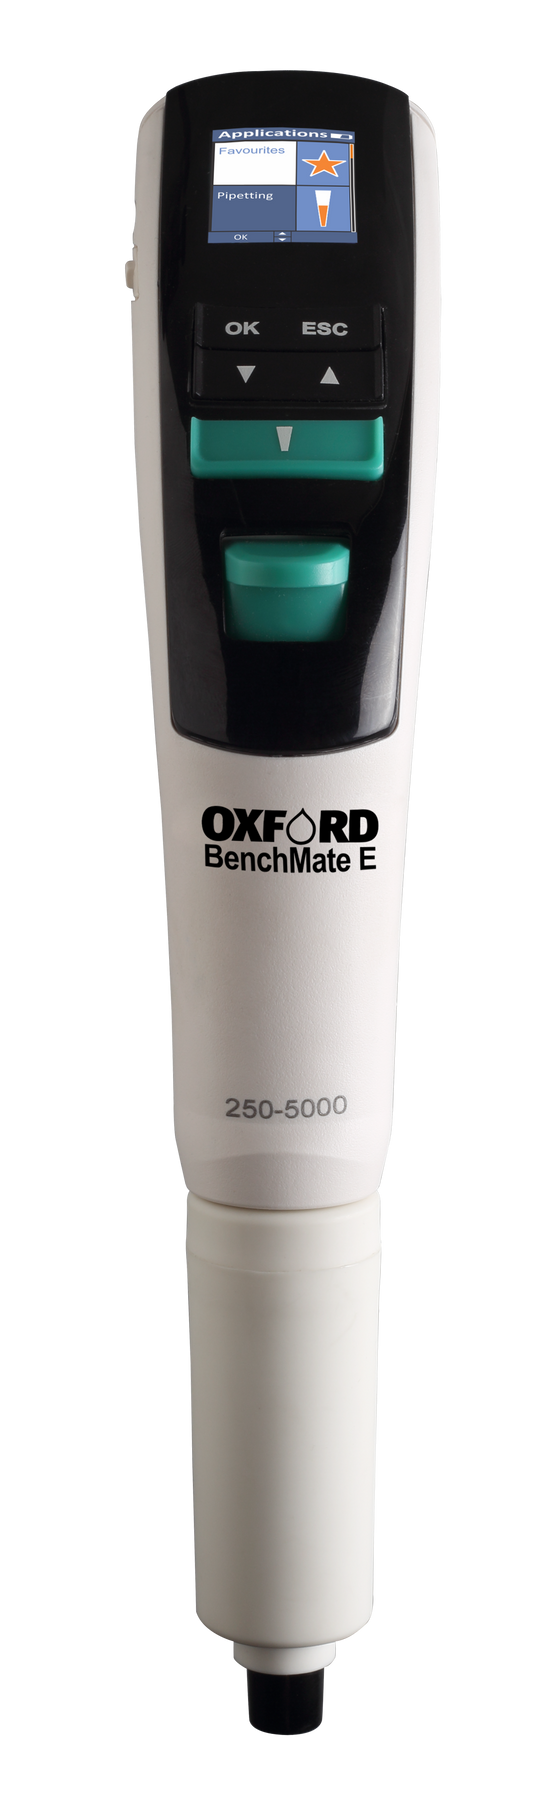 Oxford BenchMate Electronic Pipette 250-5000 µl